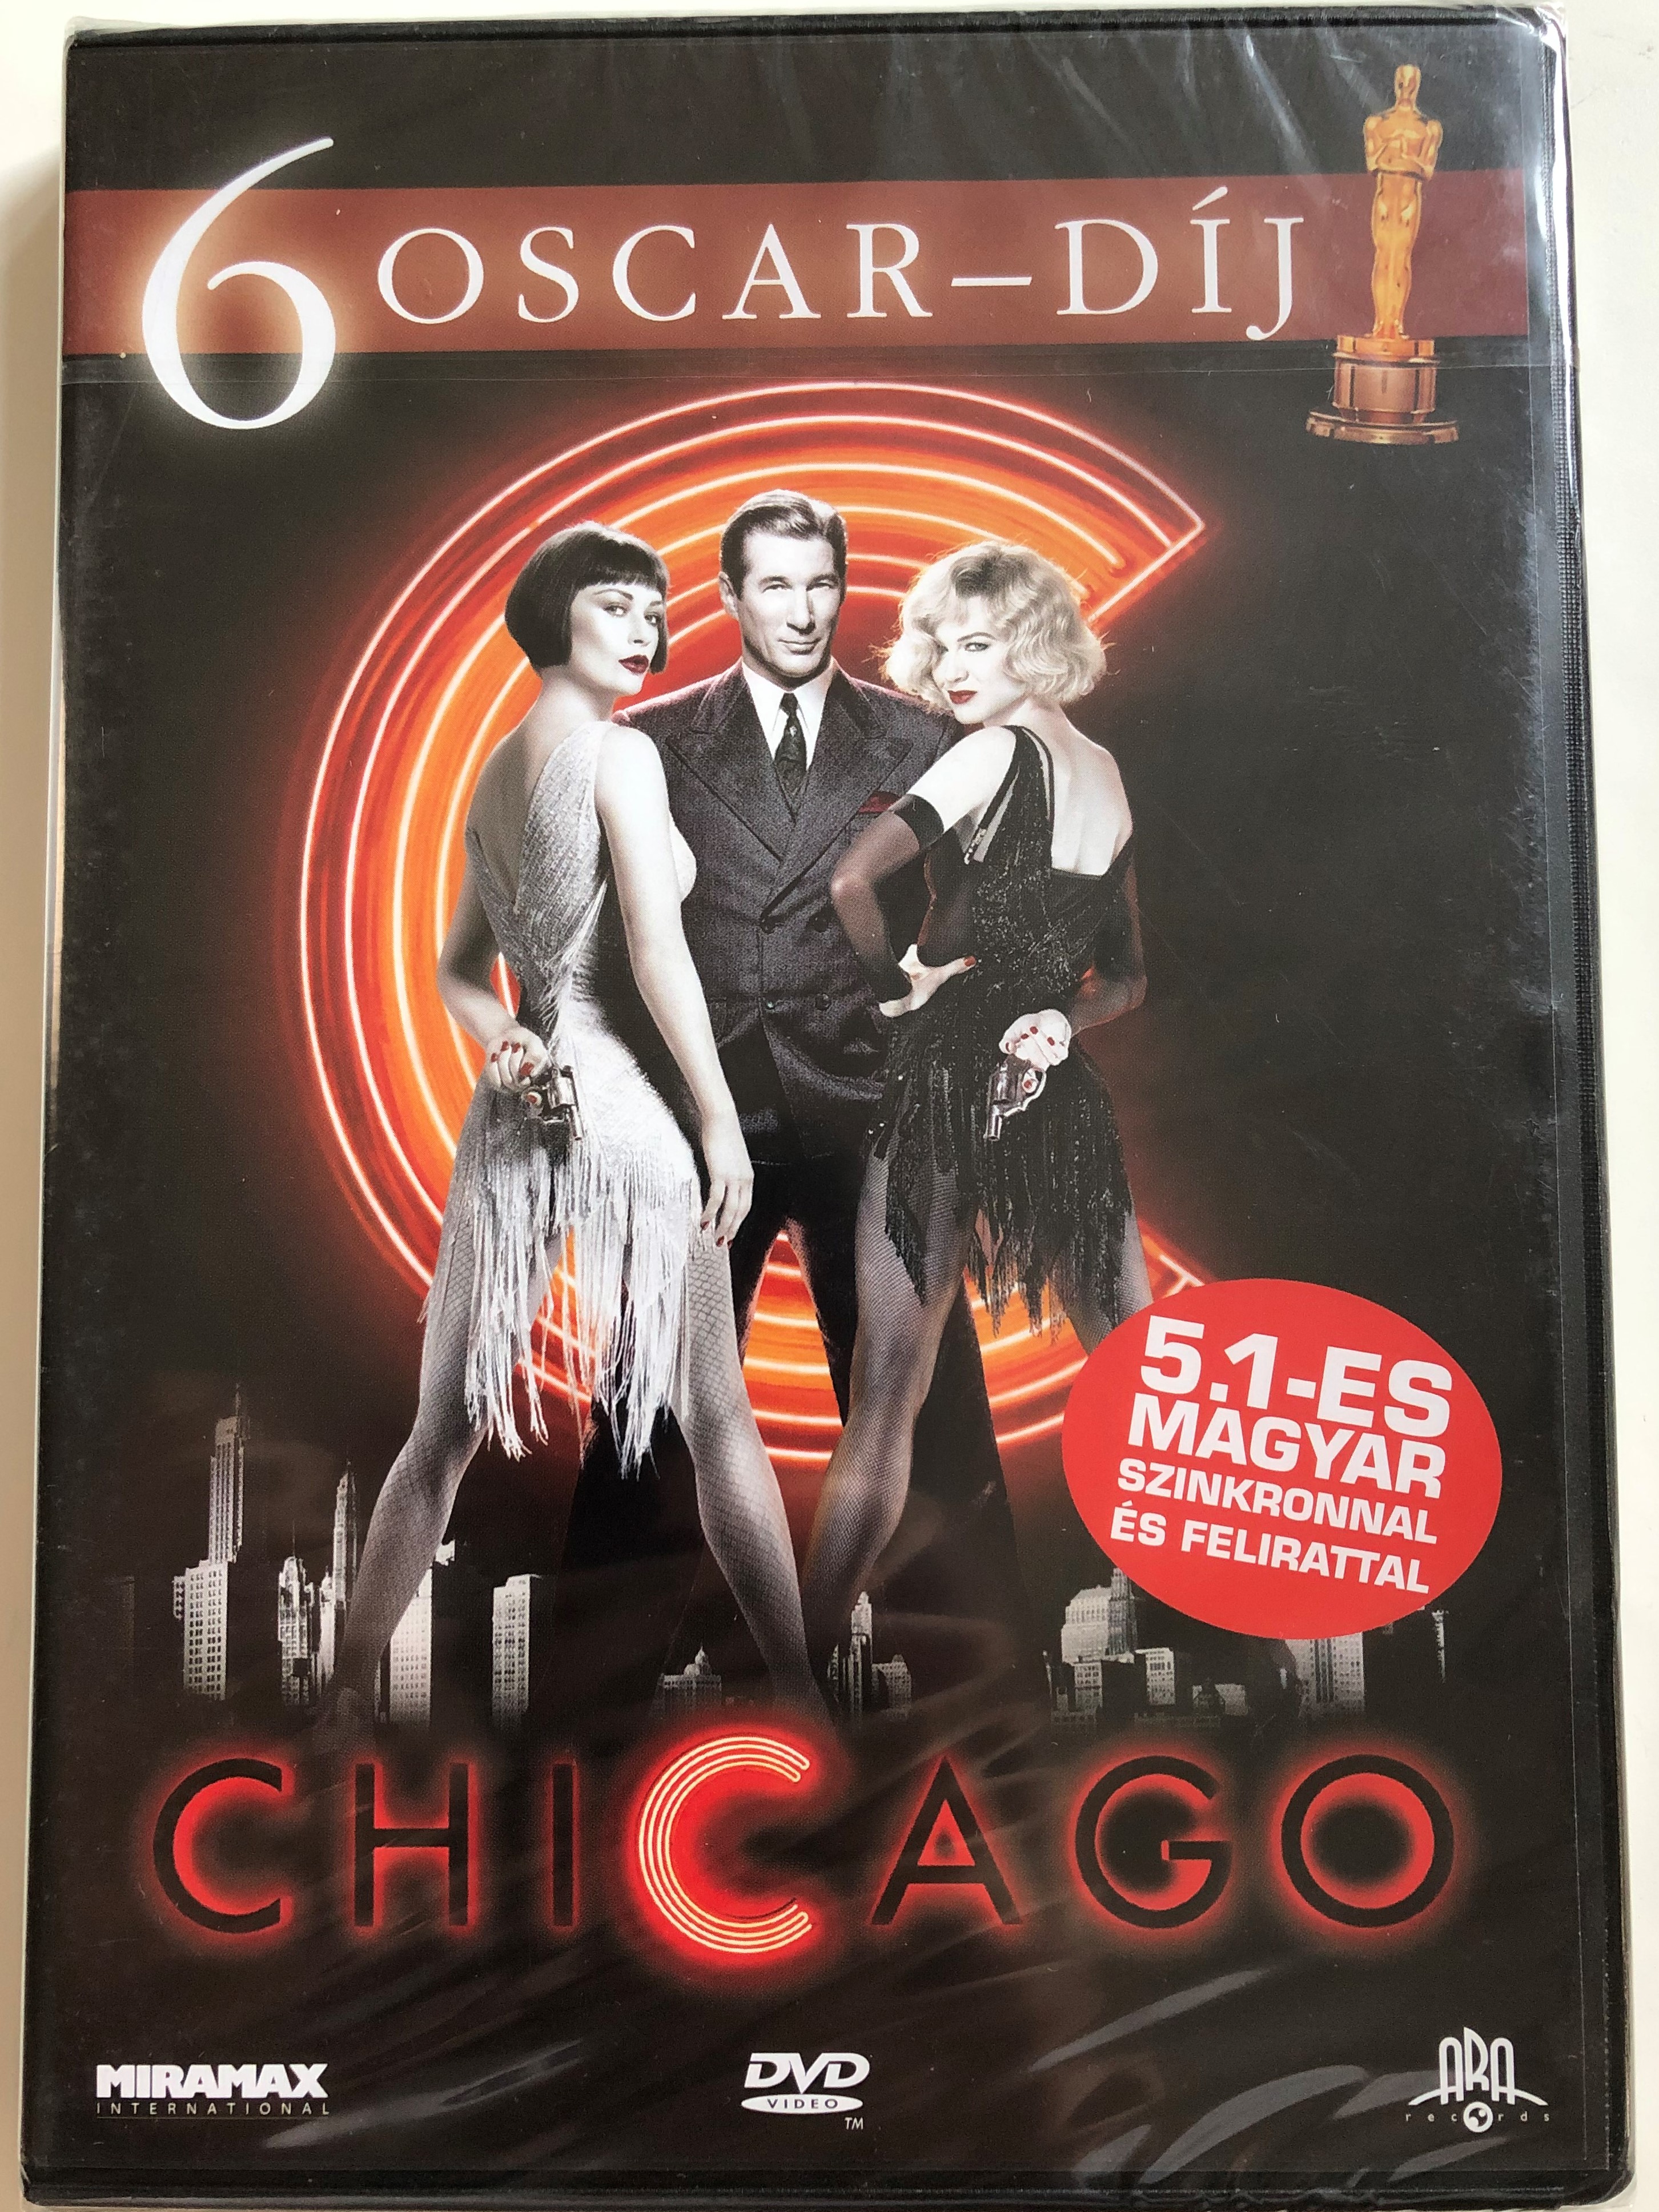 chicago-dvd-2002-the-musical-directed-by-rob-marshall-1.jpg